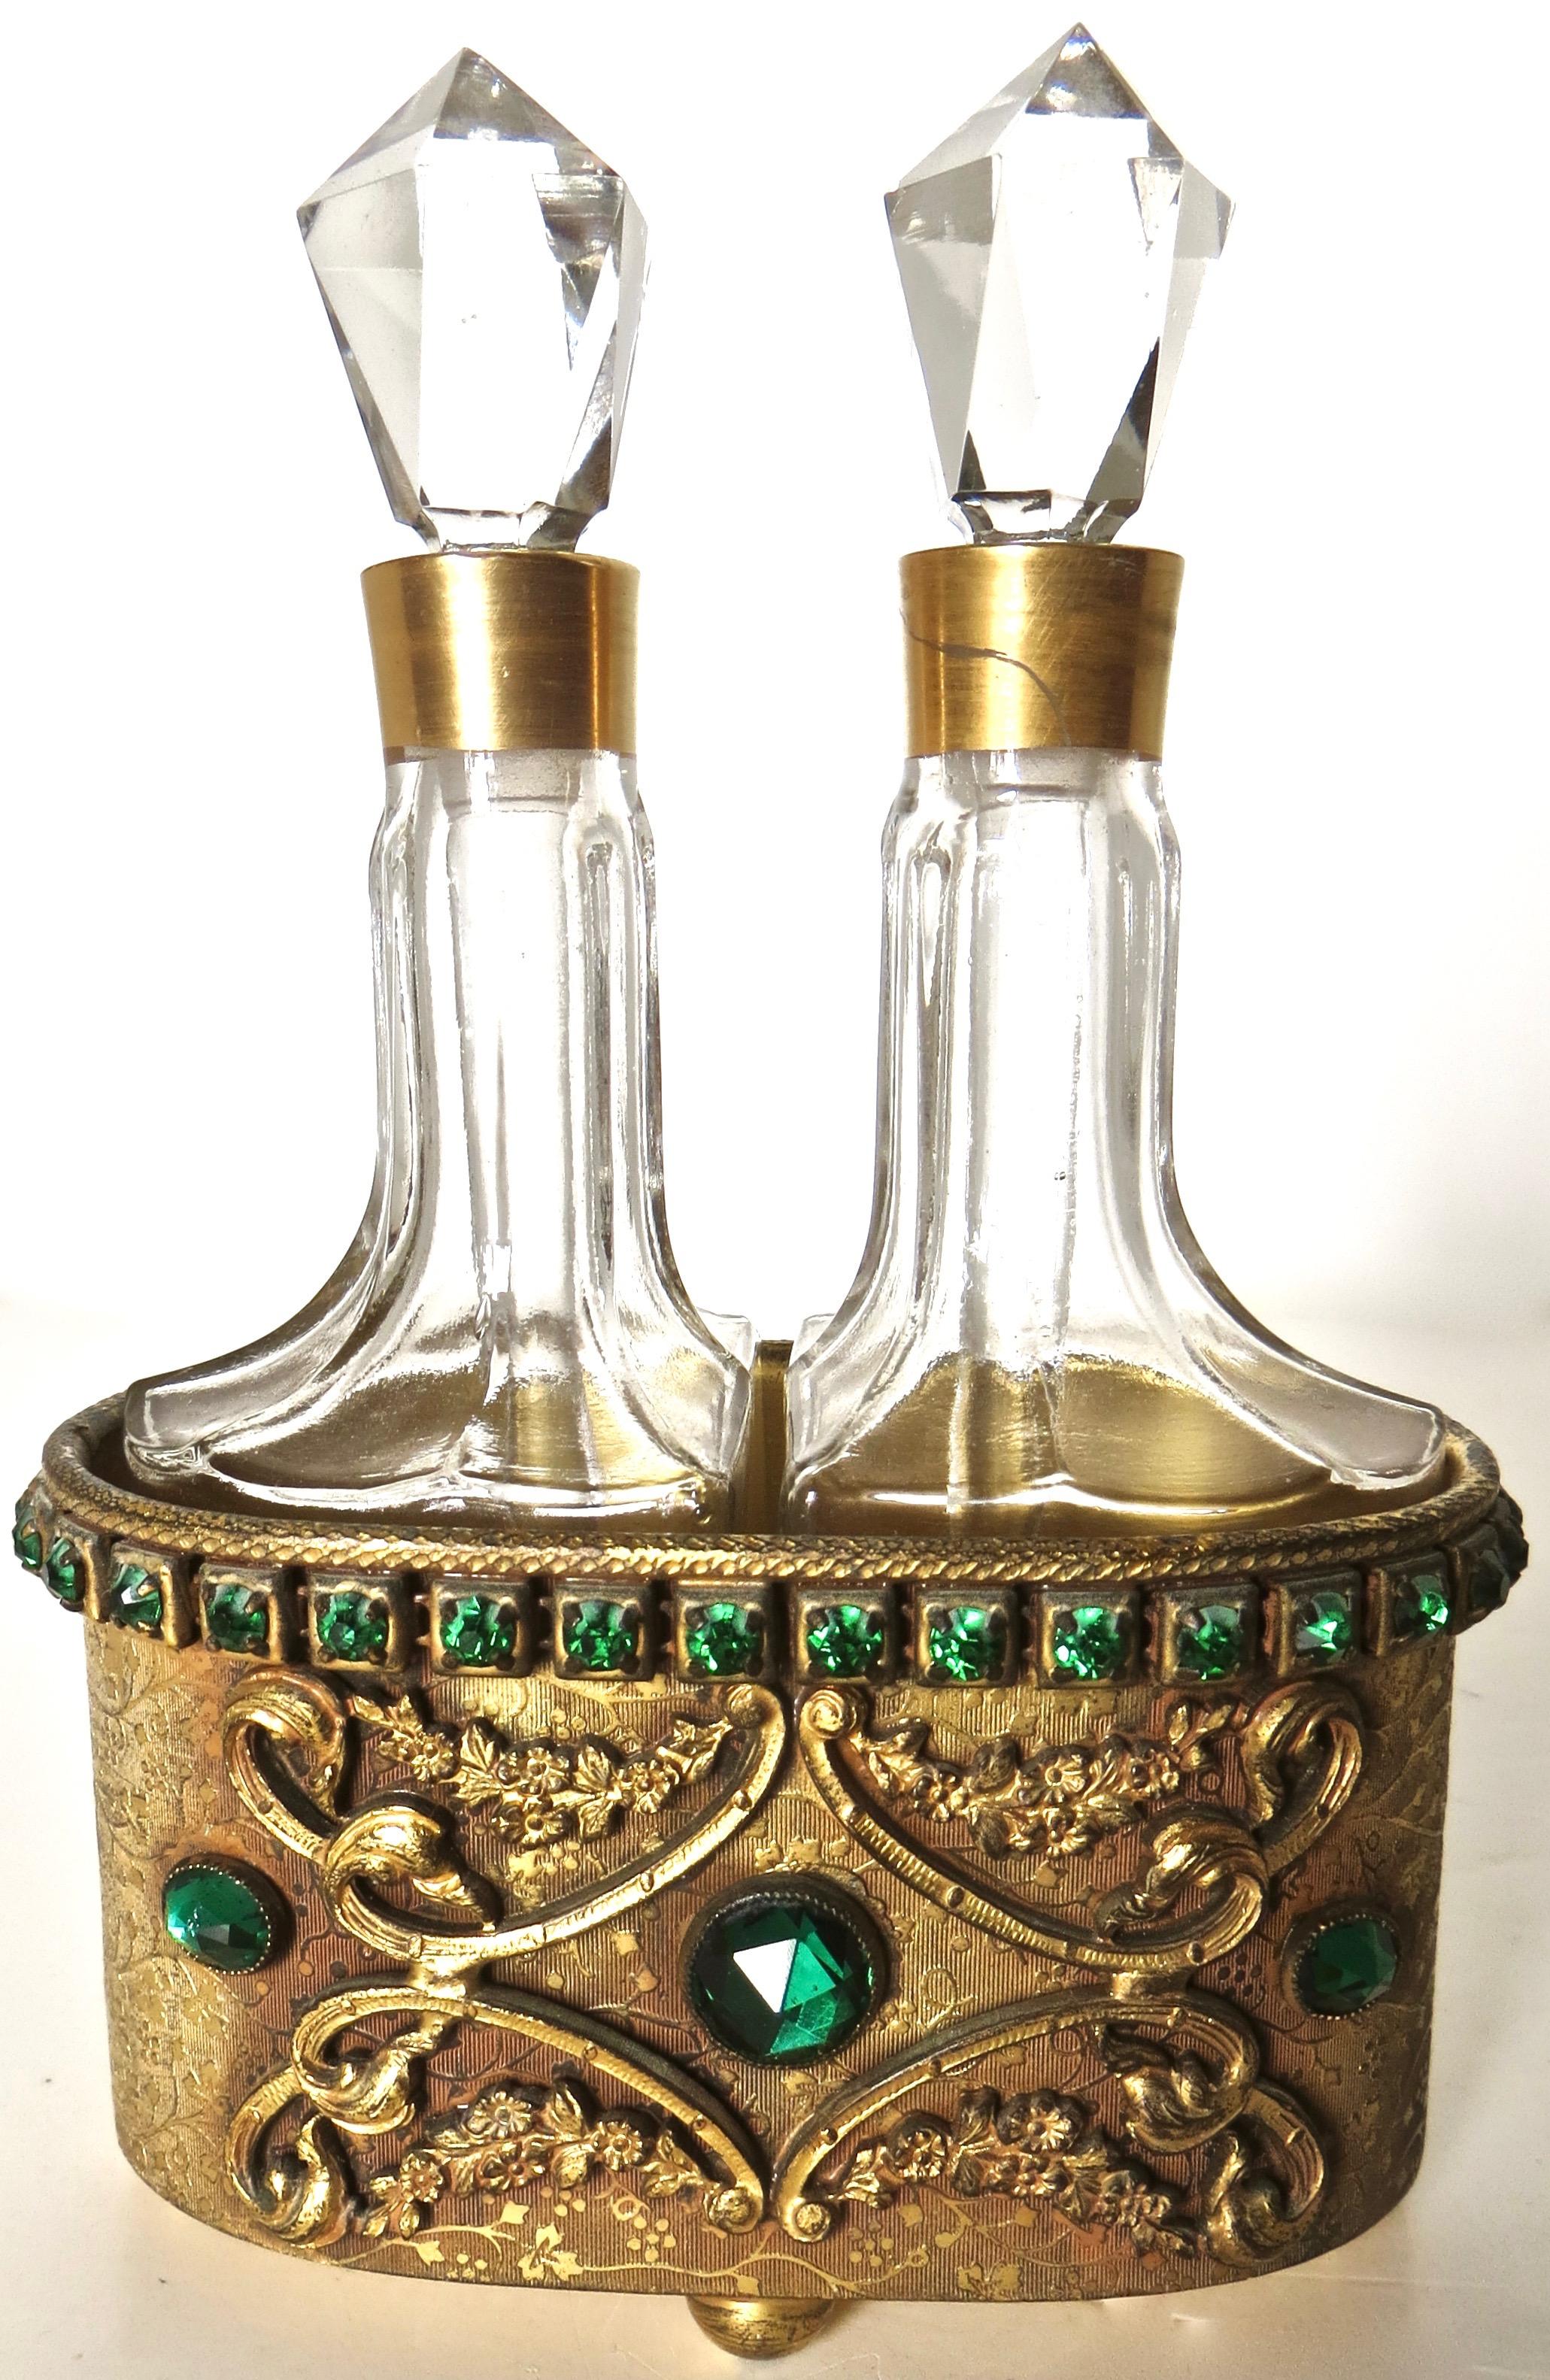 Art Nouveau Two Perfume Bottles in Fitted Casket on Decorated Tray by E. & J. Bass, Ca 1900 For Sale